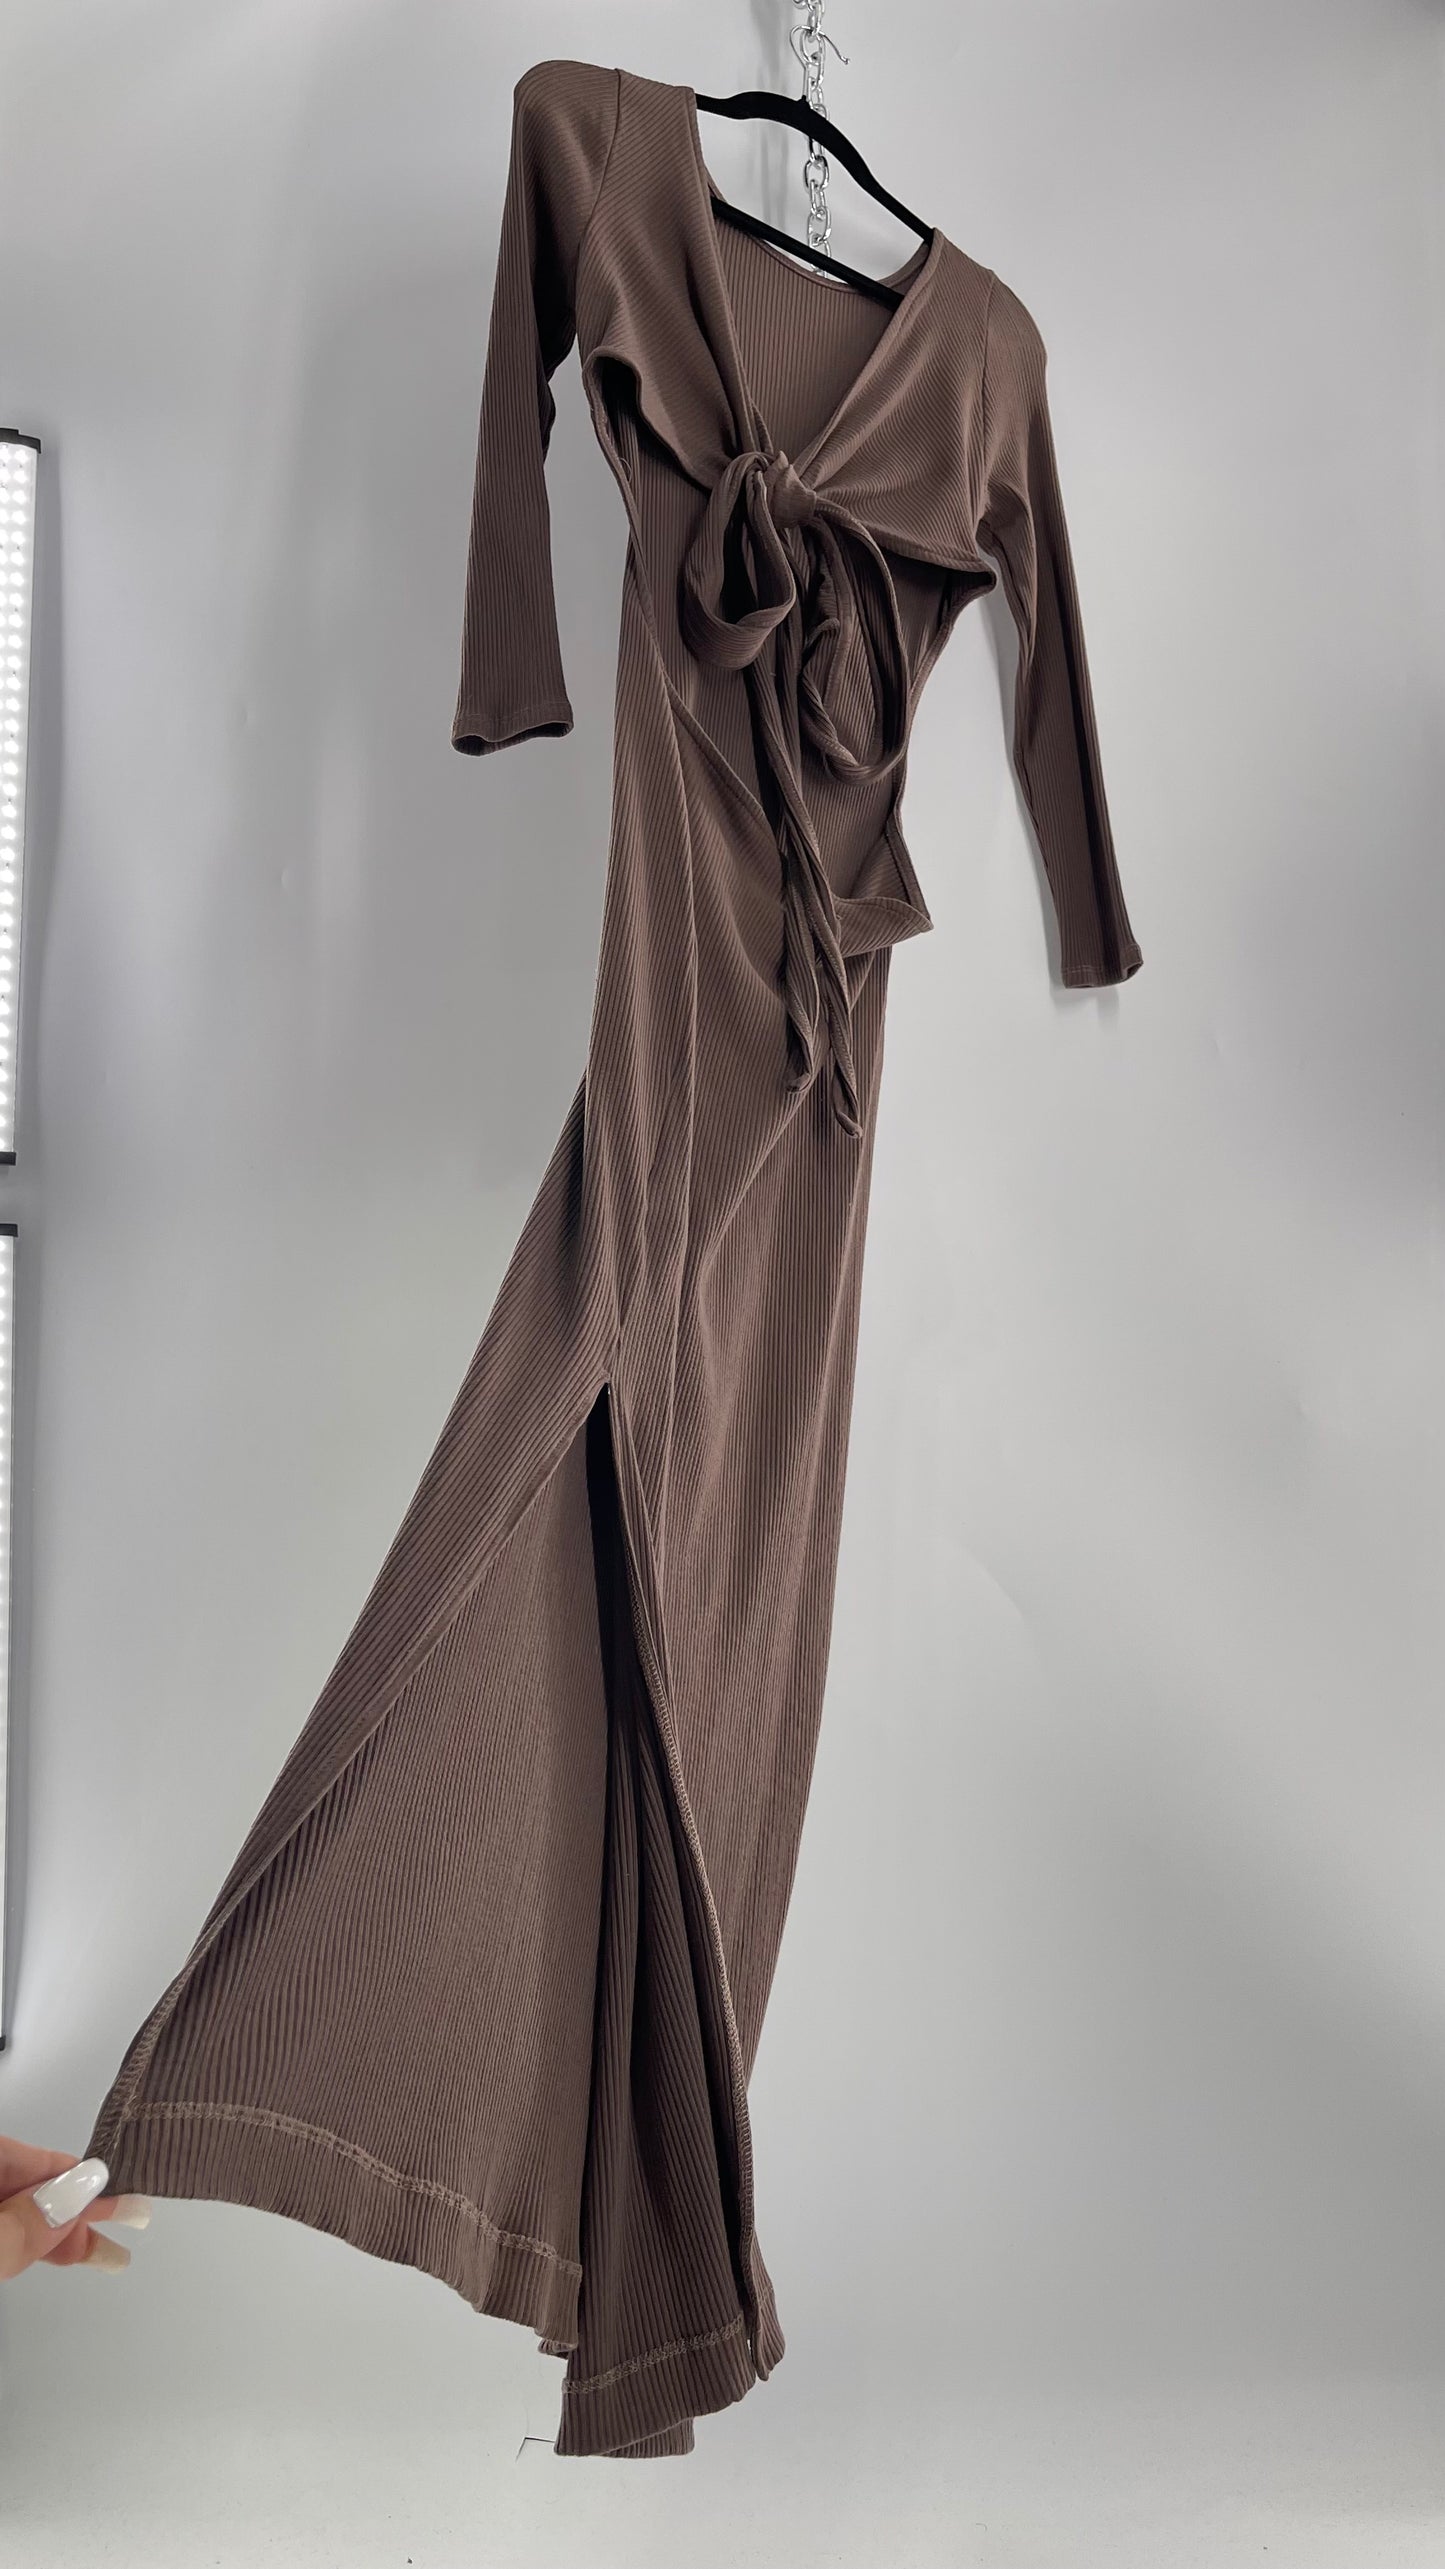 Free People Brown Ribbed Maxi Dress with Low Open Back and Dramatic Tie Detail (Large)